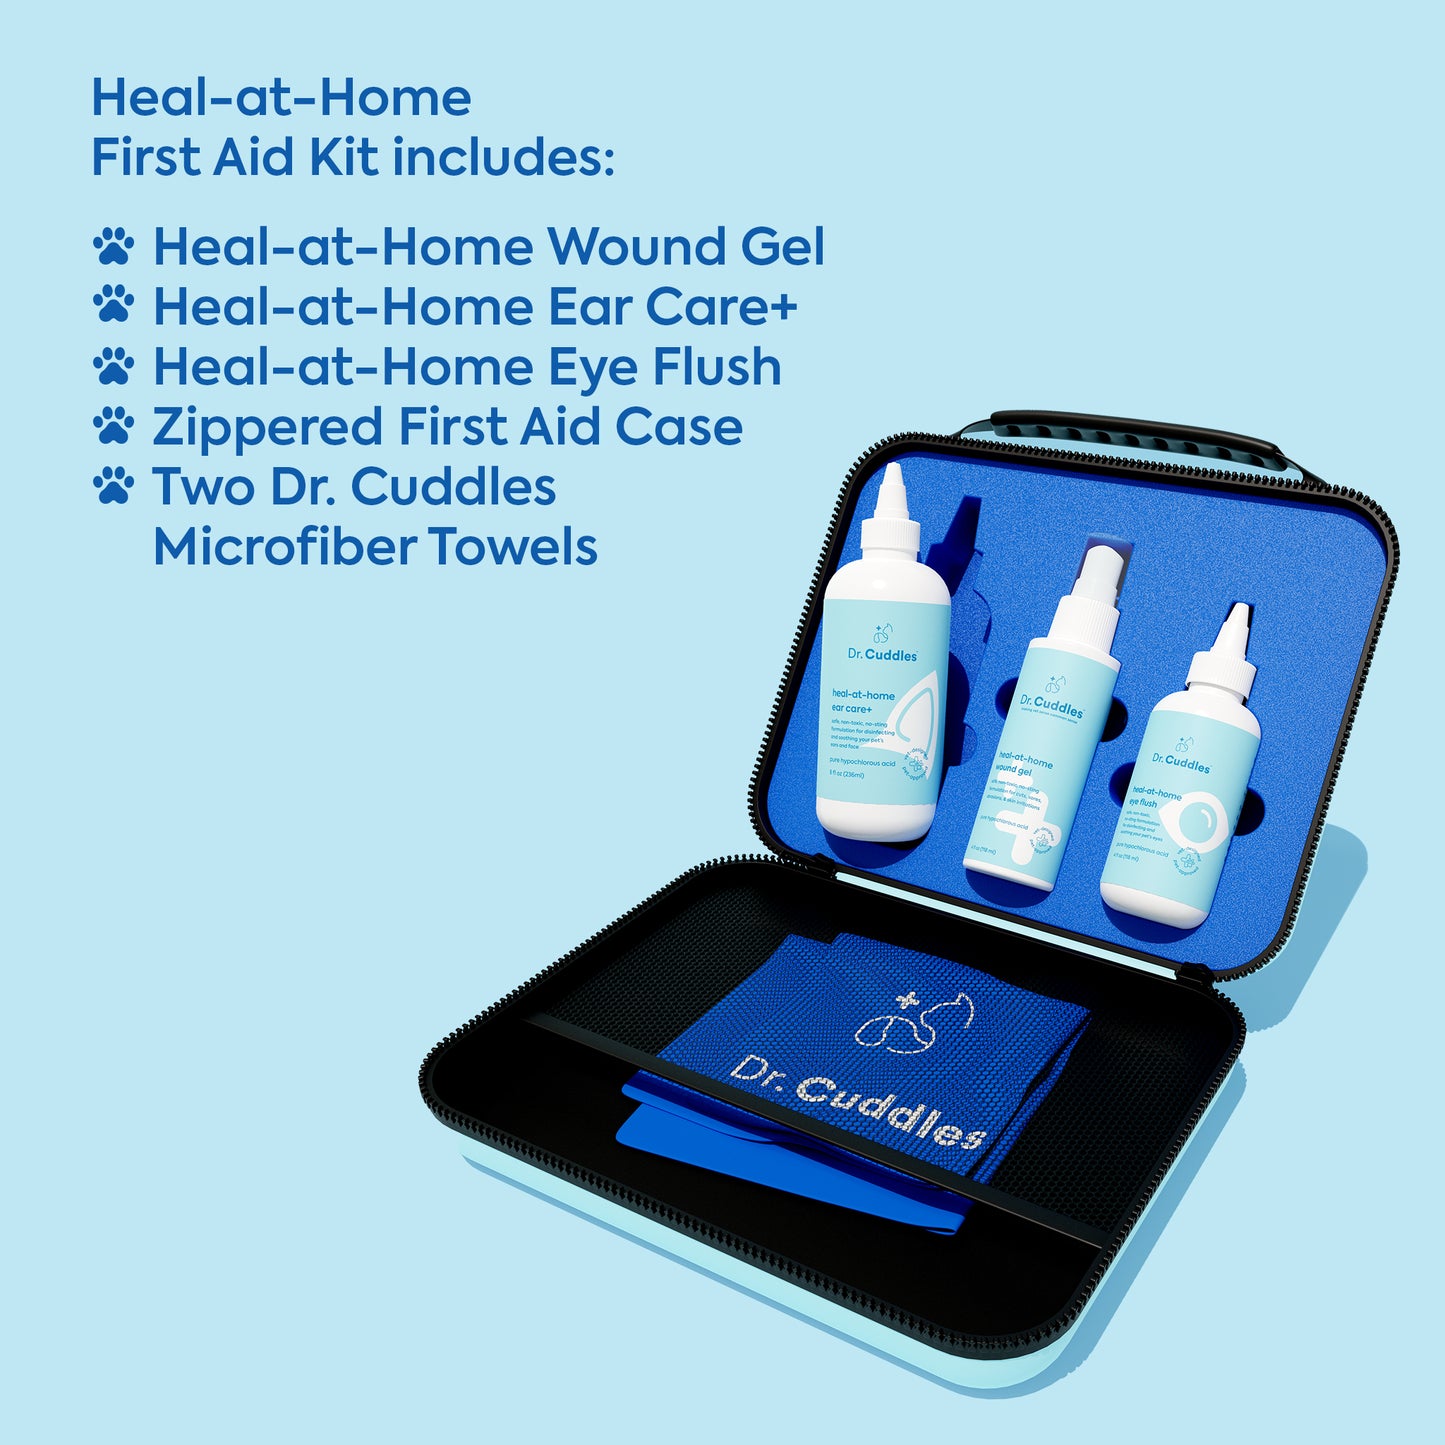 Heal-at-home first aid kit